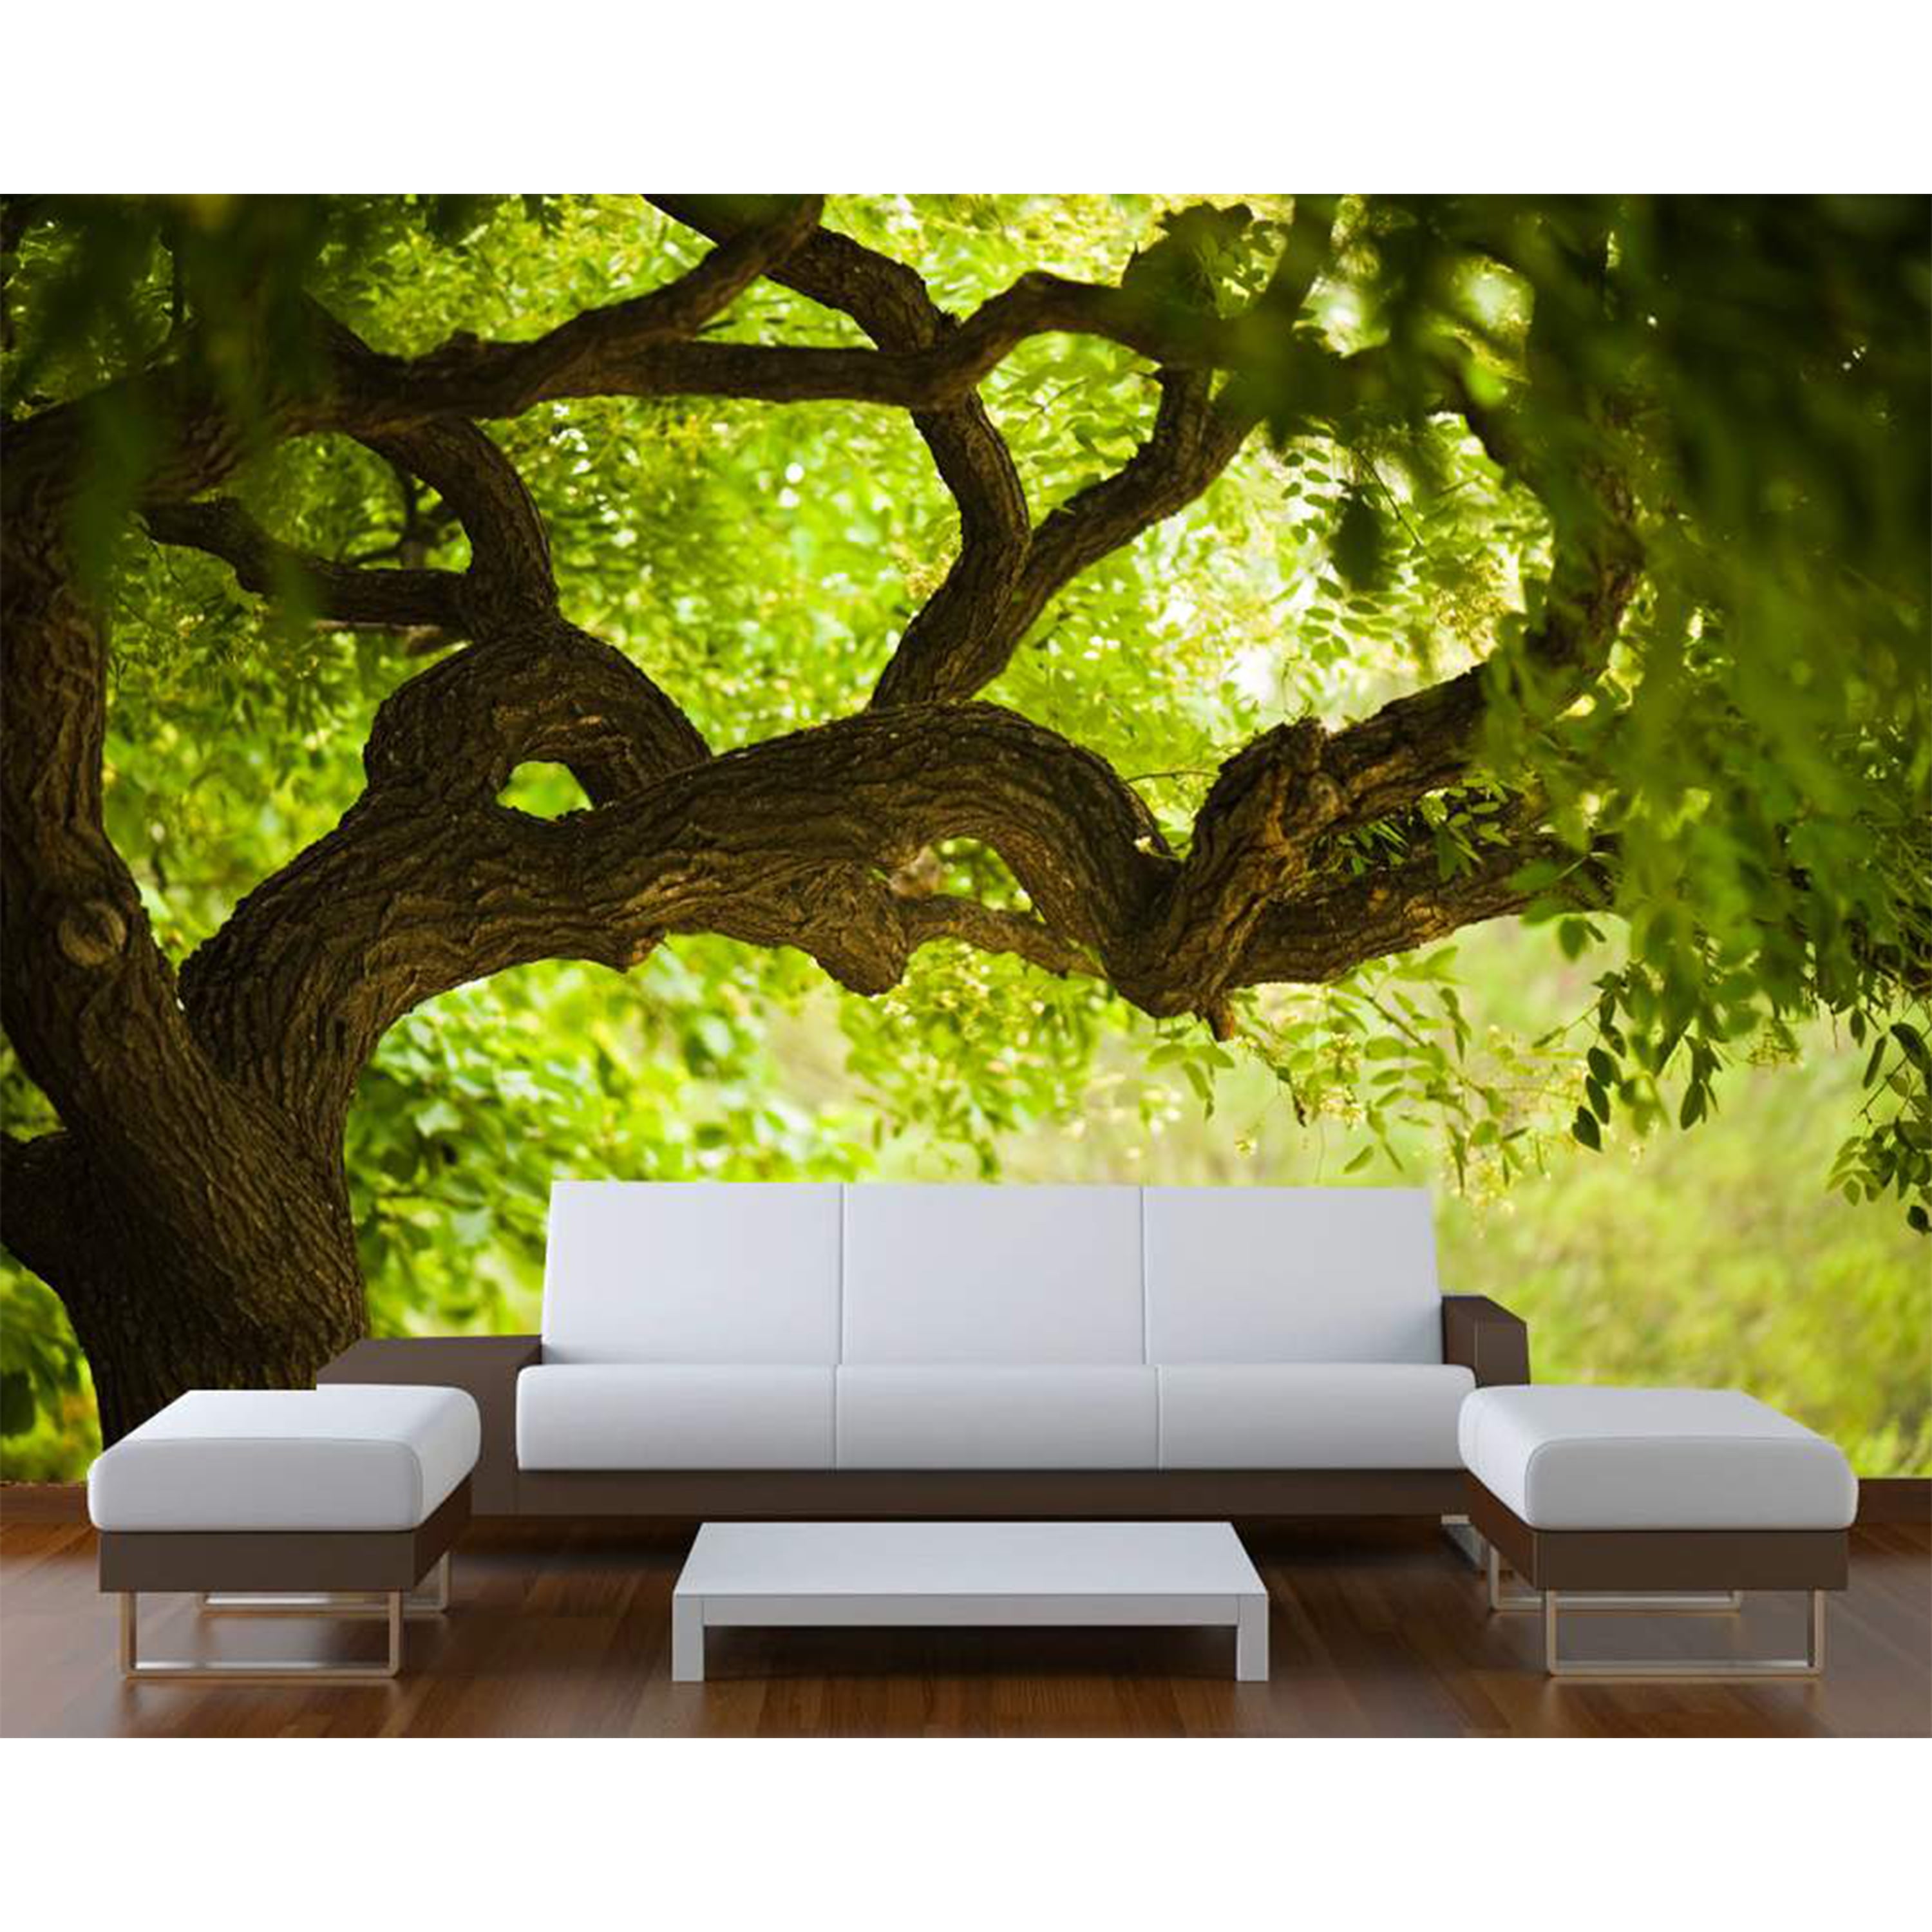 Big Tree Branches Green Nature Tree Wall Mural Photo Wallpaper GIANT